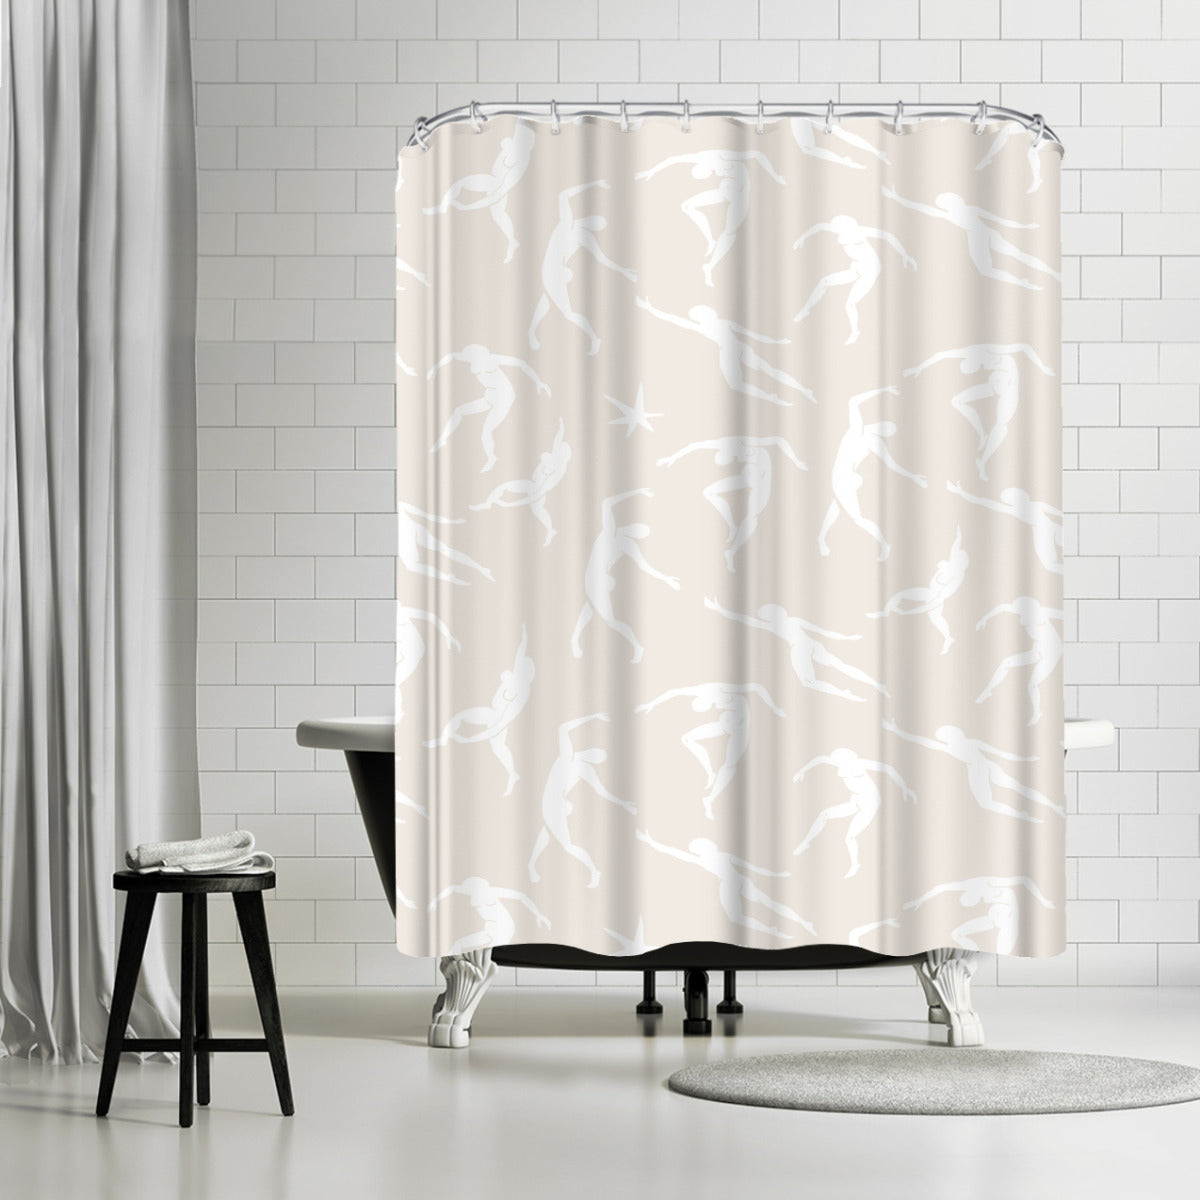 Beige Matisse Cut Outs 002 by Thomas Succes - Shower Curtain, Shower Curtain, 74" X 71"